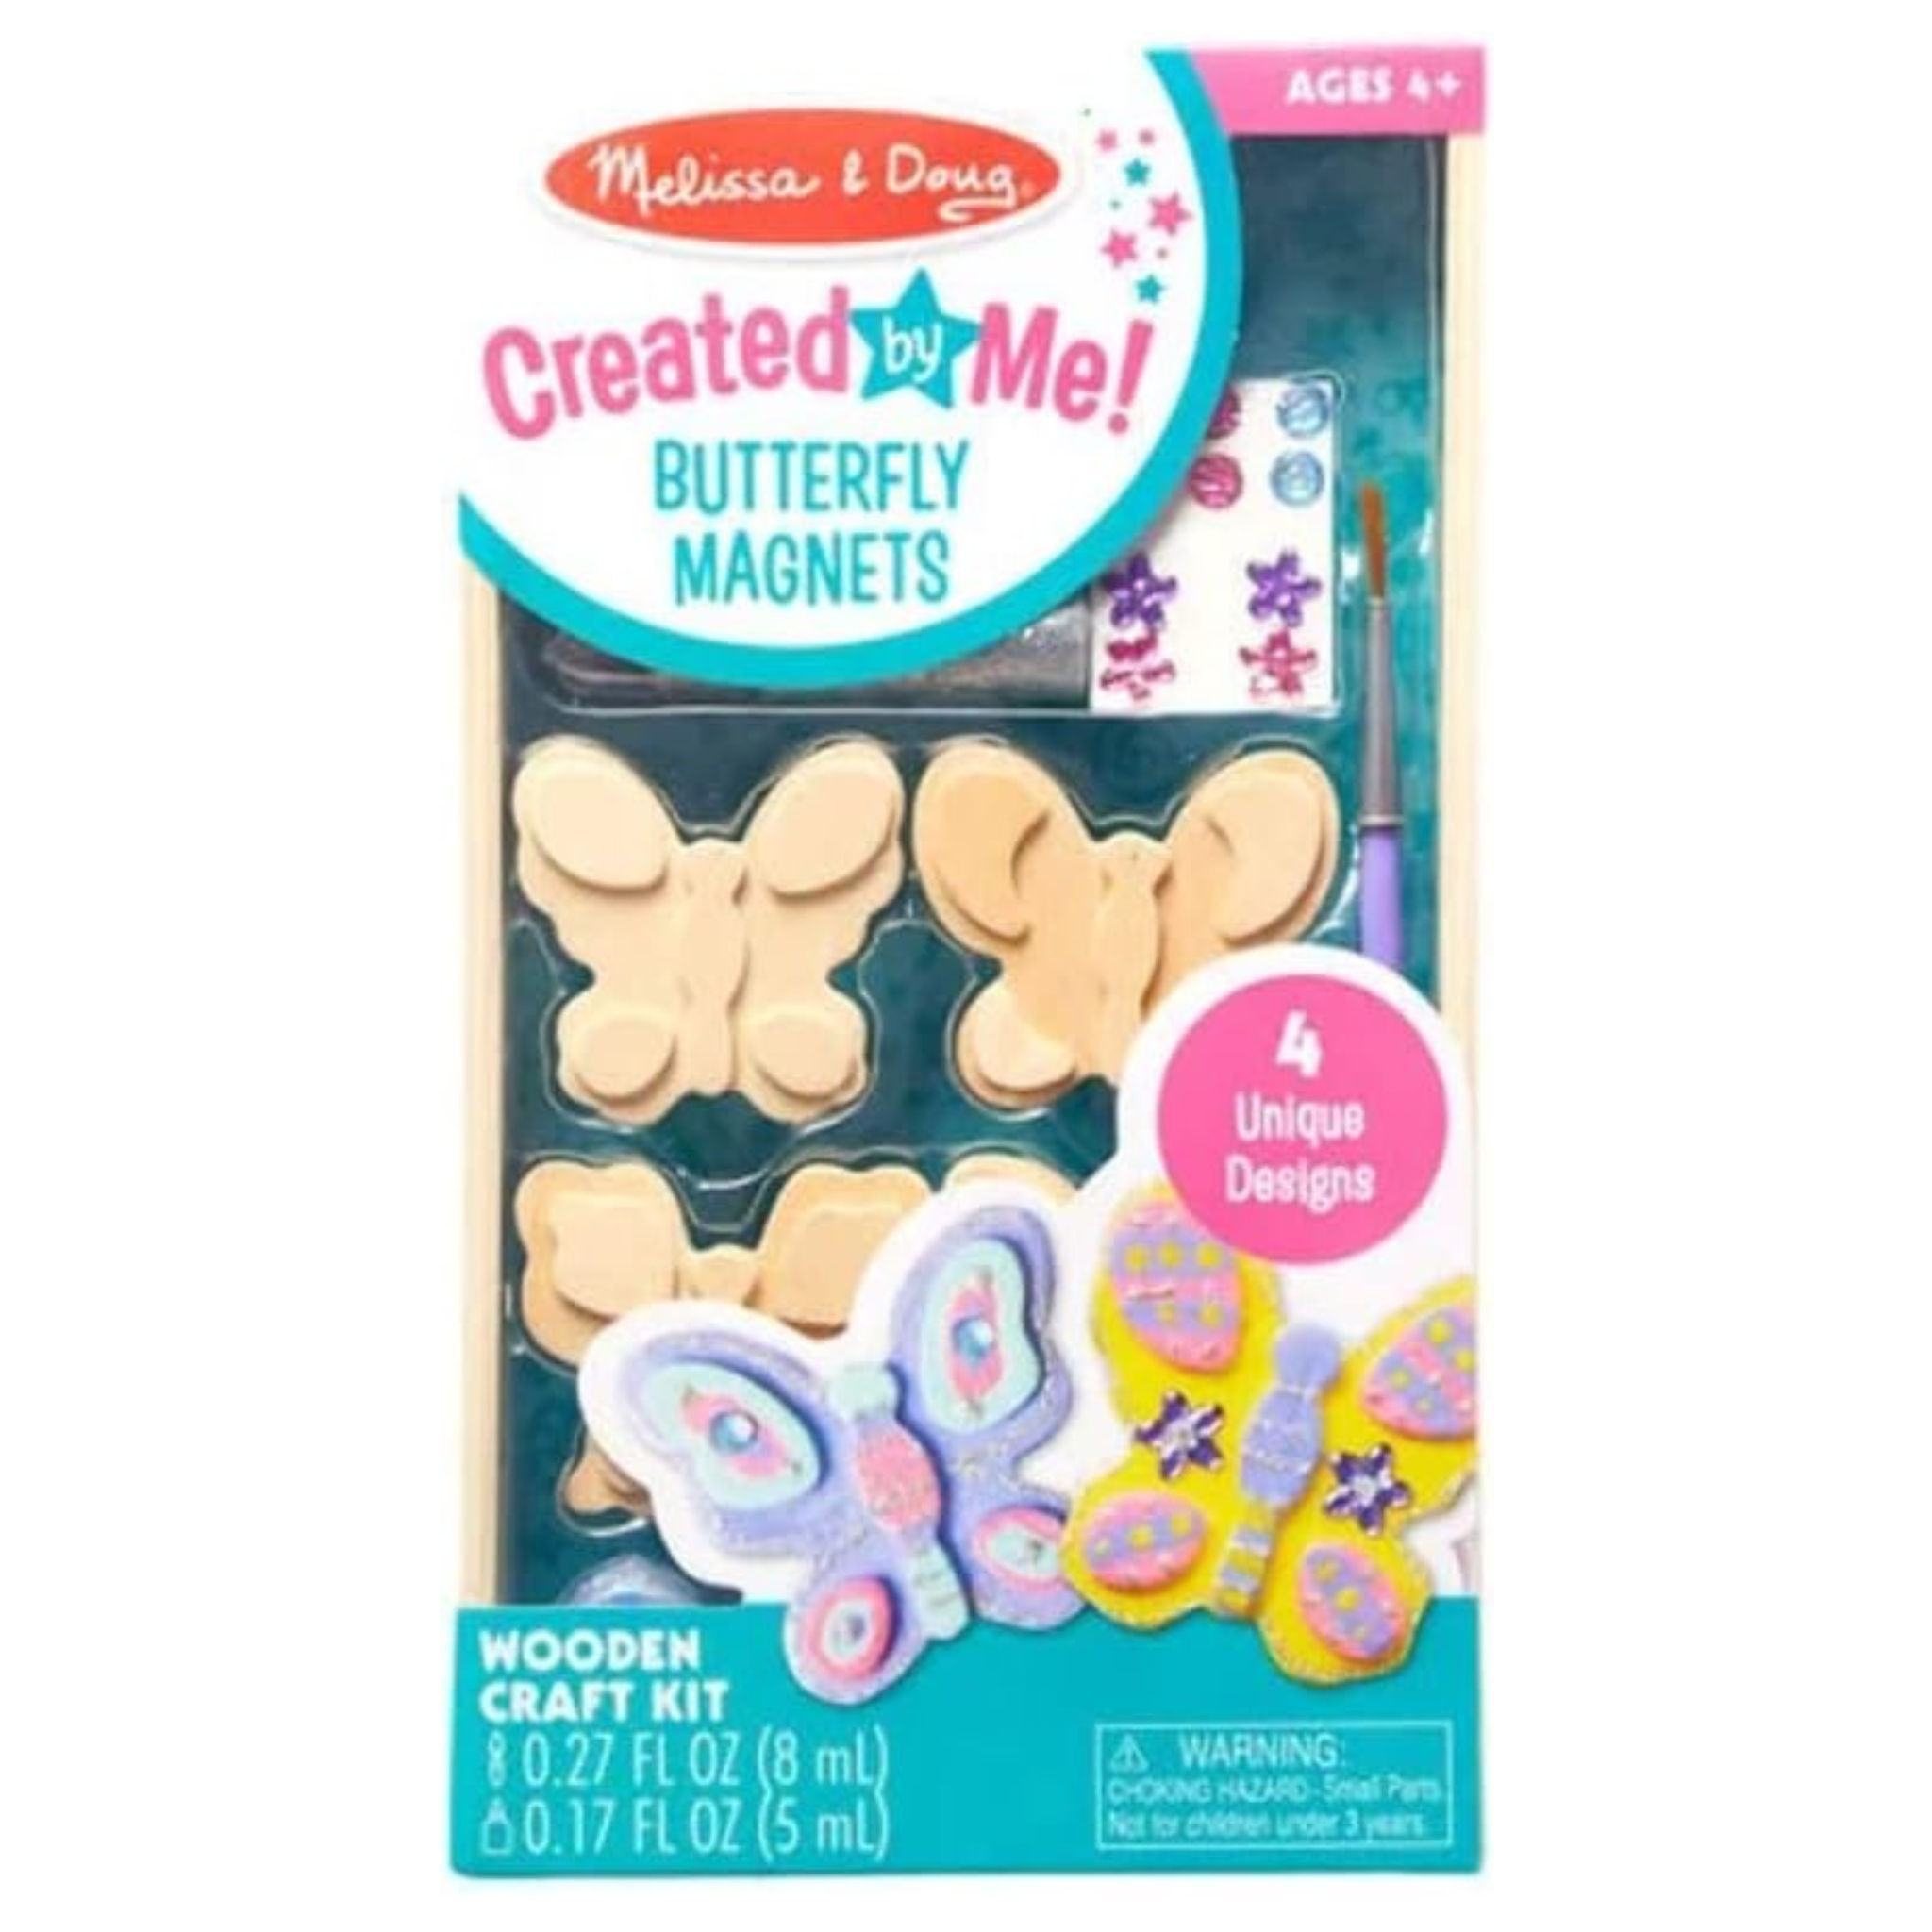 Melissa & Doug Created by Me! Wooden Butterfly Magnets Craft Kit